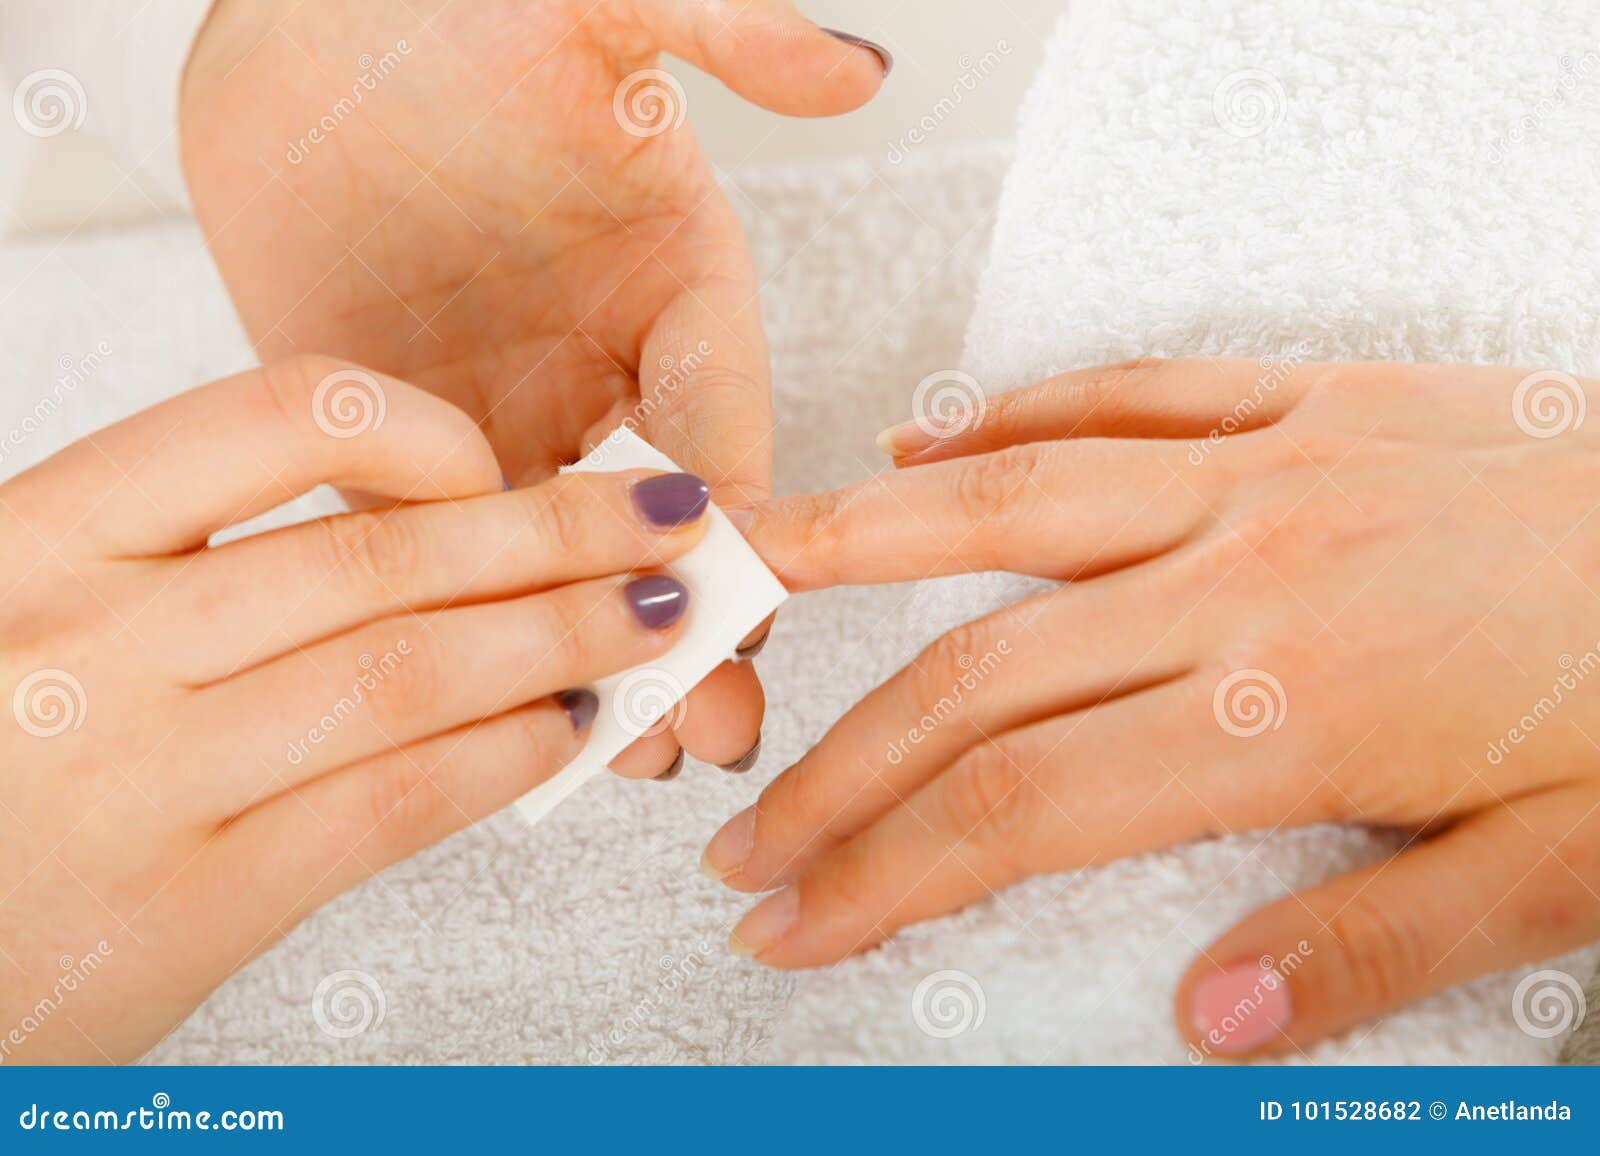 Woman Making Manicure Using Nail Polish Remover Stock Photo - Image of  beauty, remover: 101528682